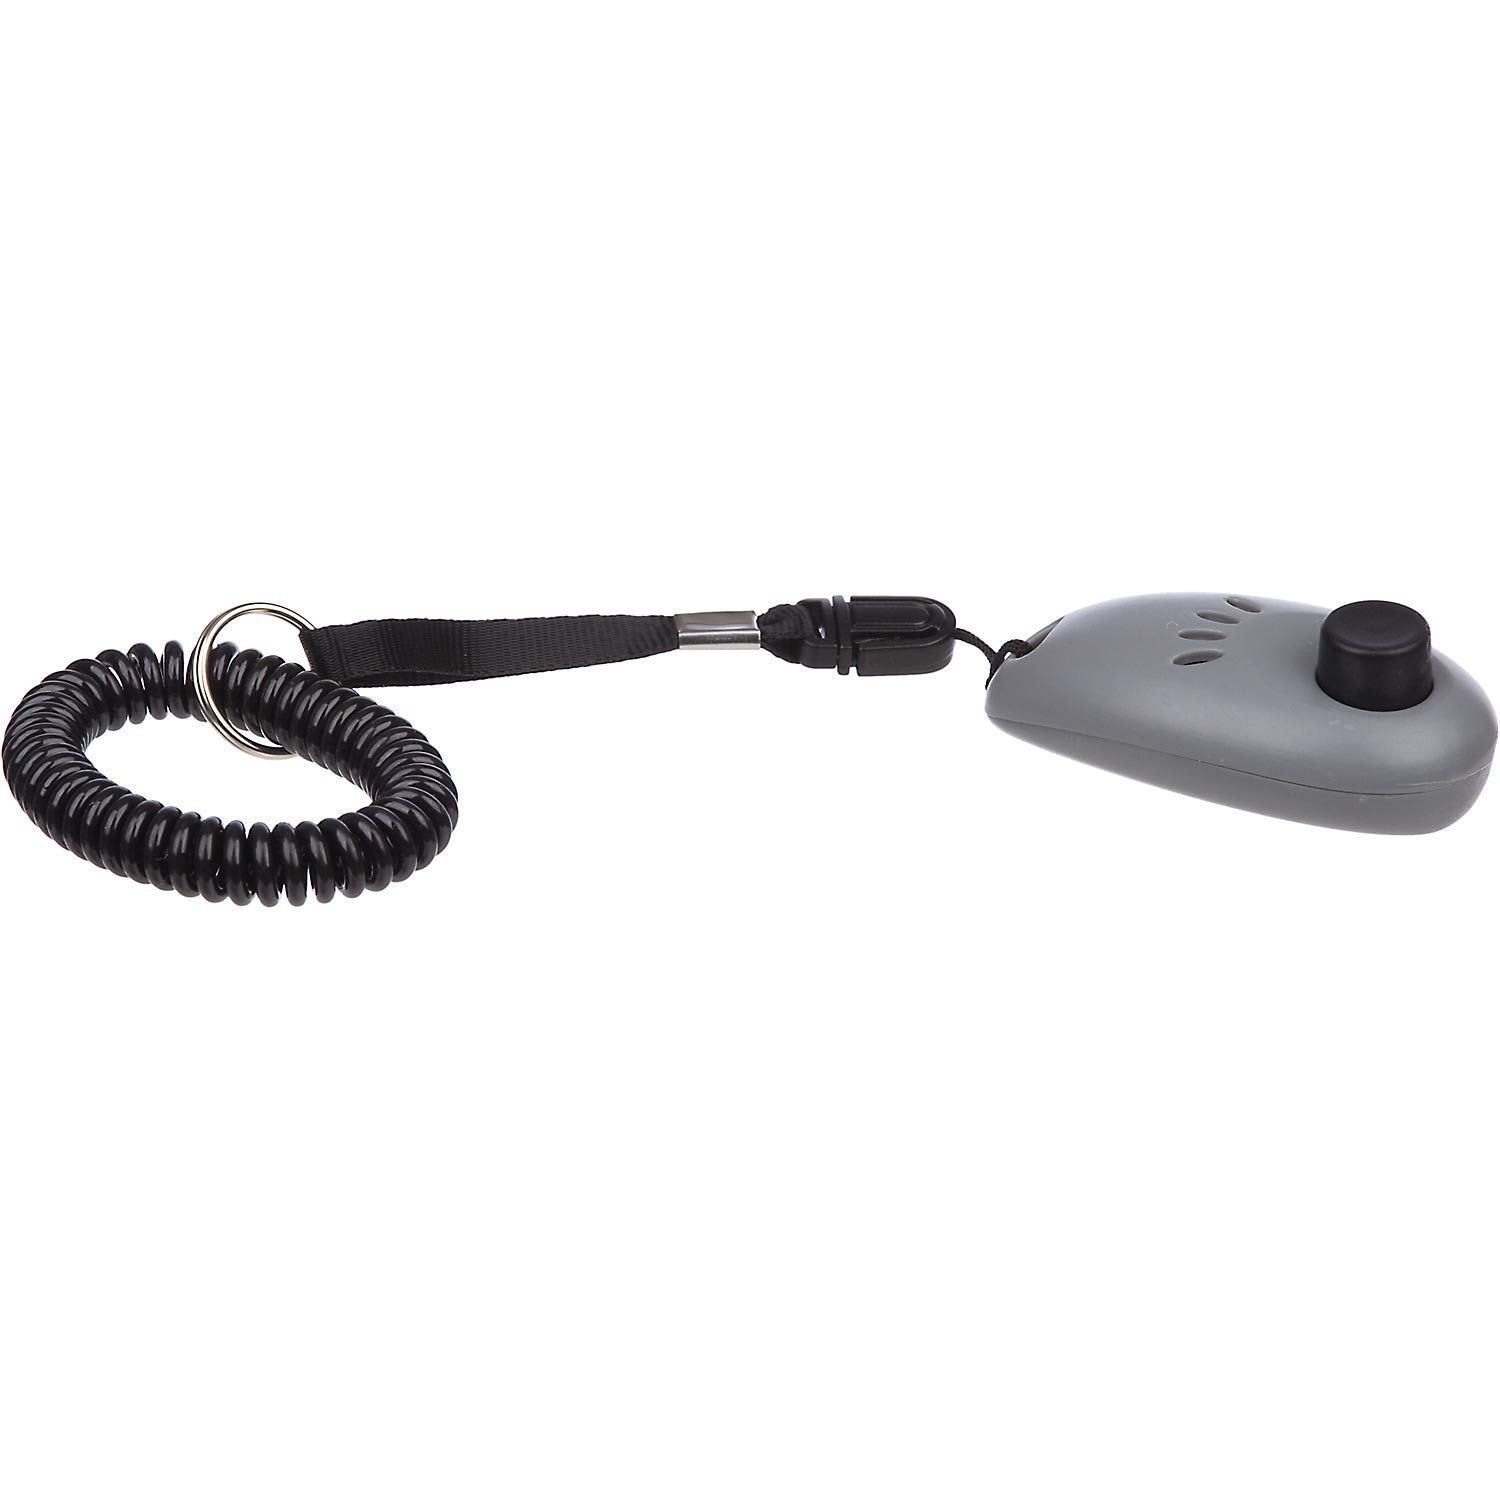 Petco Training Clicker for Dogs with Rubber Bracelet | Petco